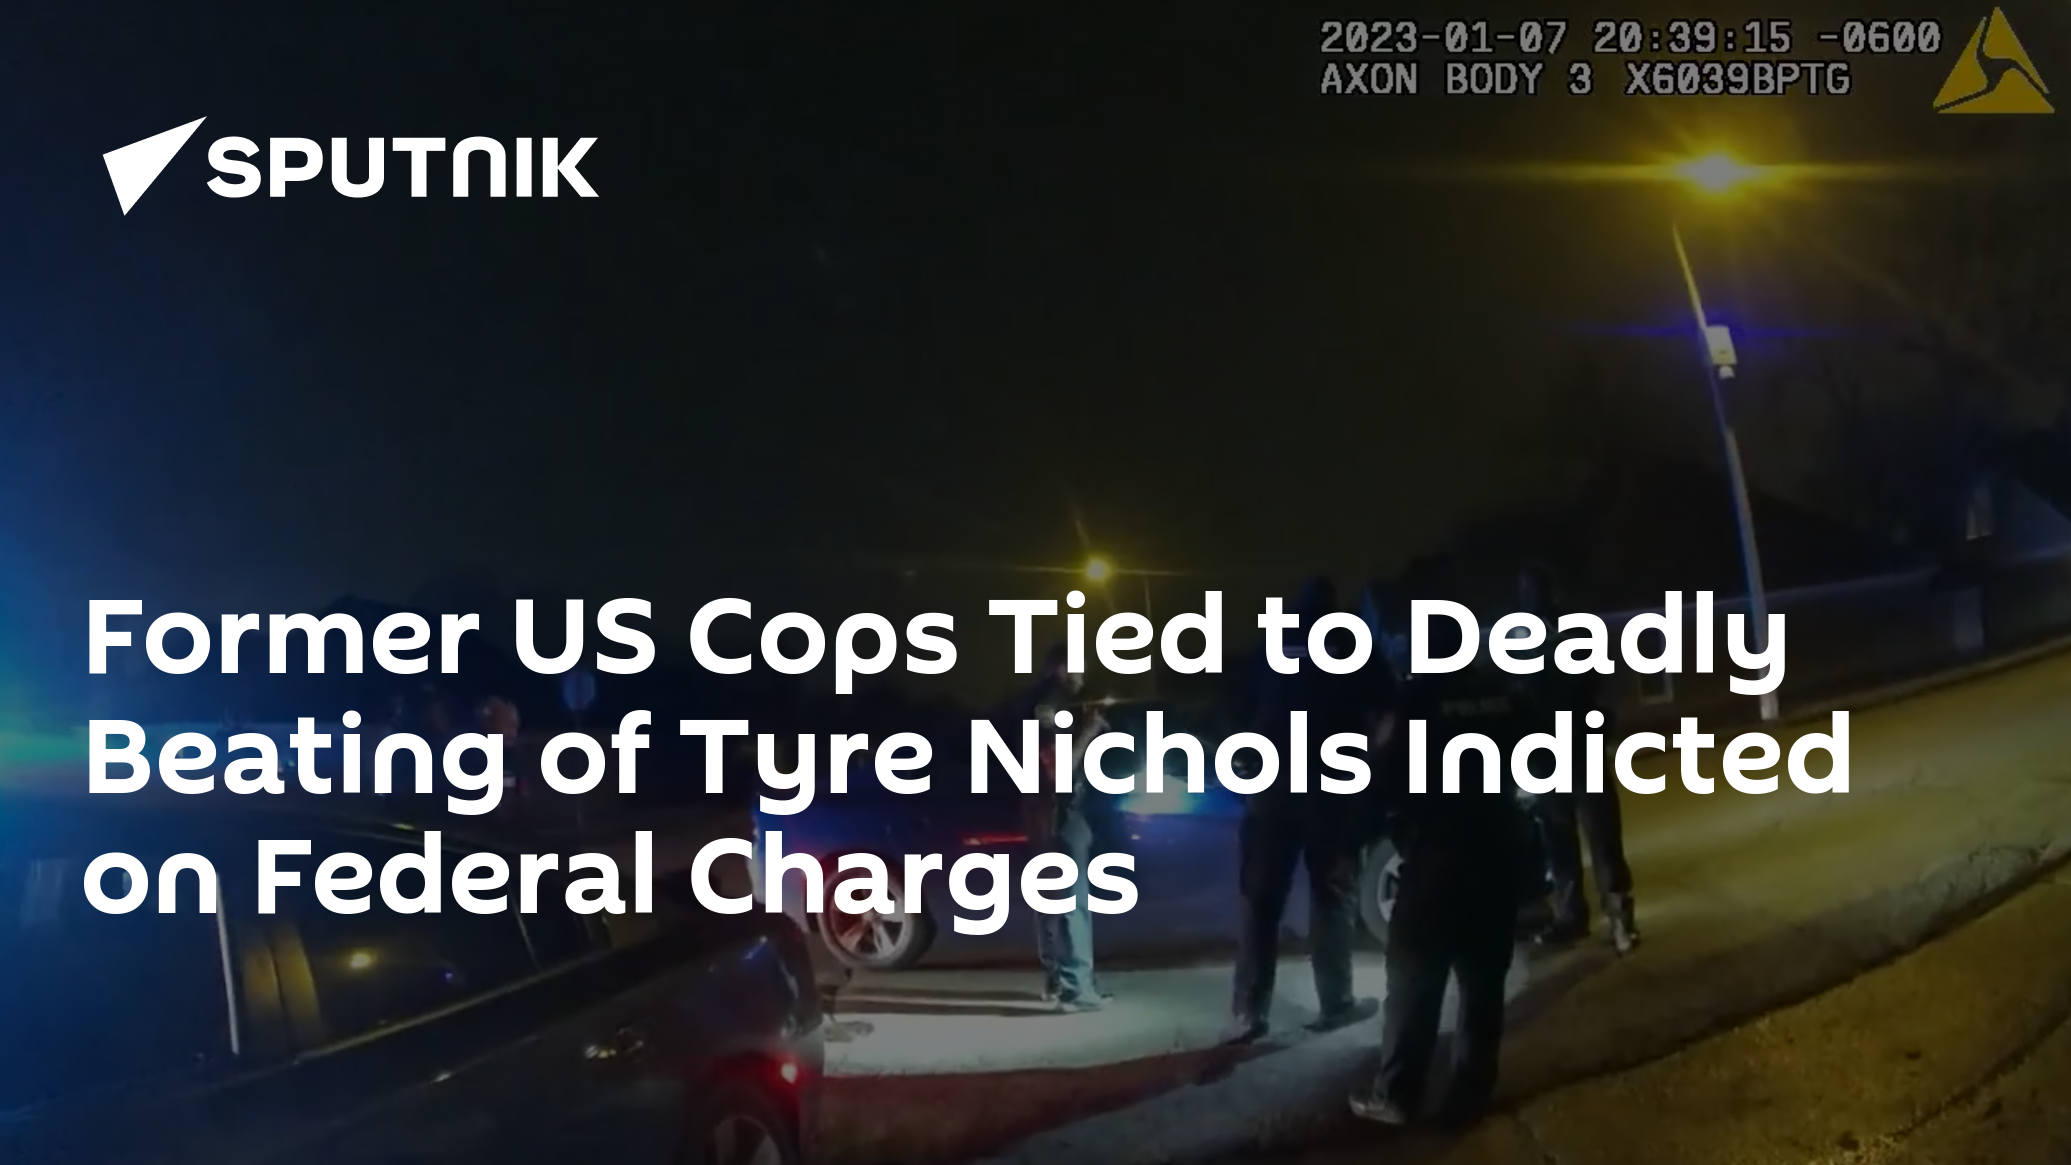 Former US Cops Tied to Deadly Beating of Tyre Nichols Indicted on Federal Charges